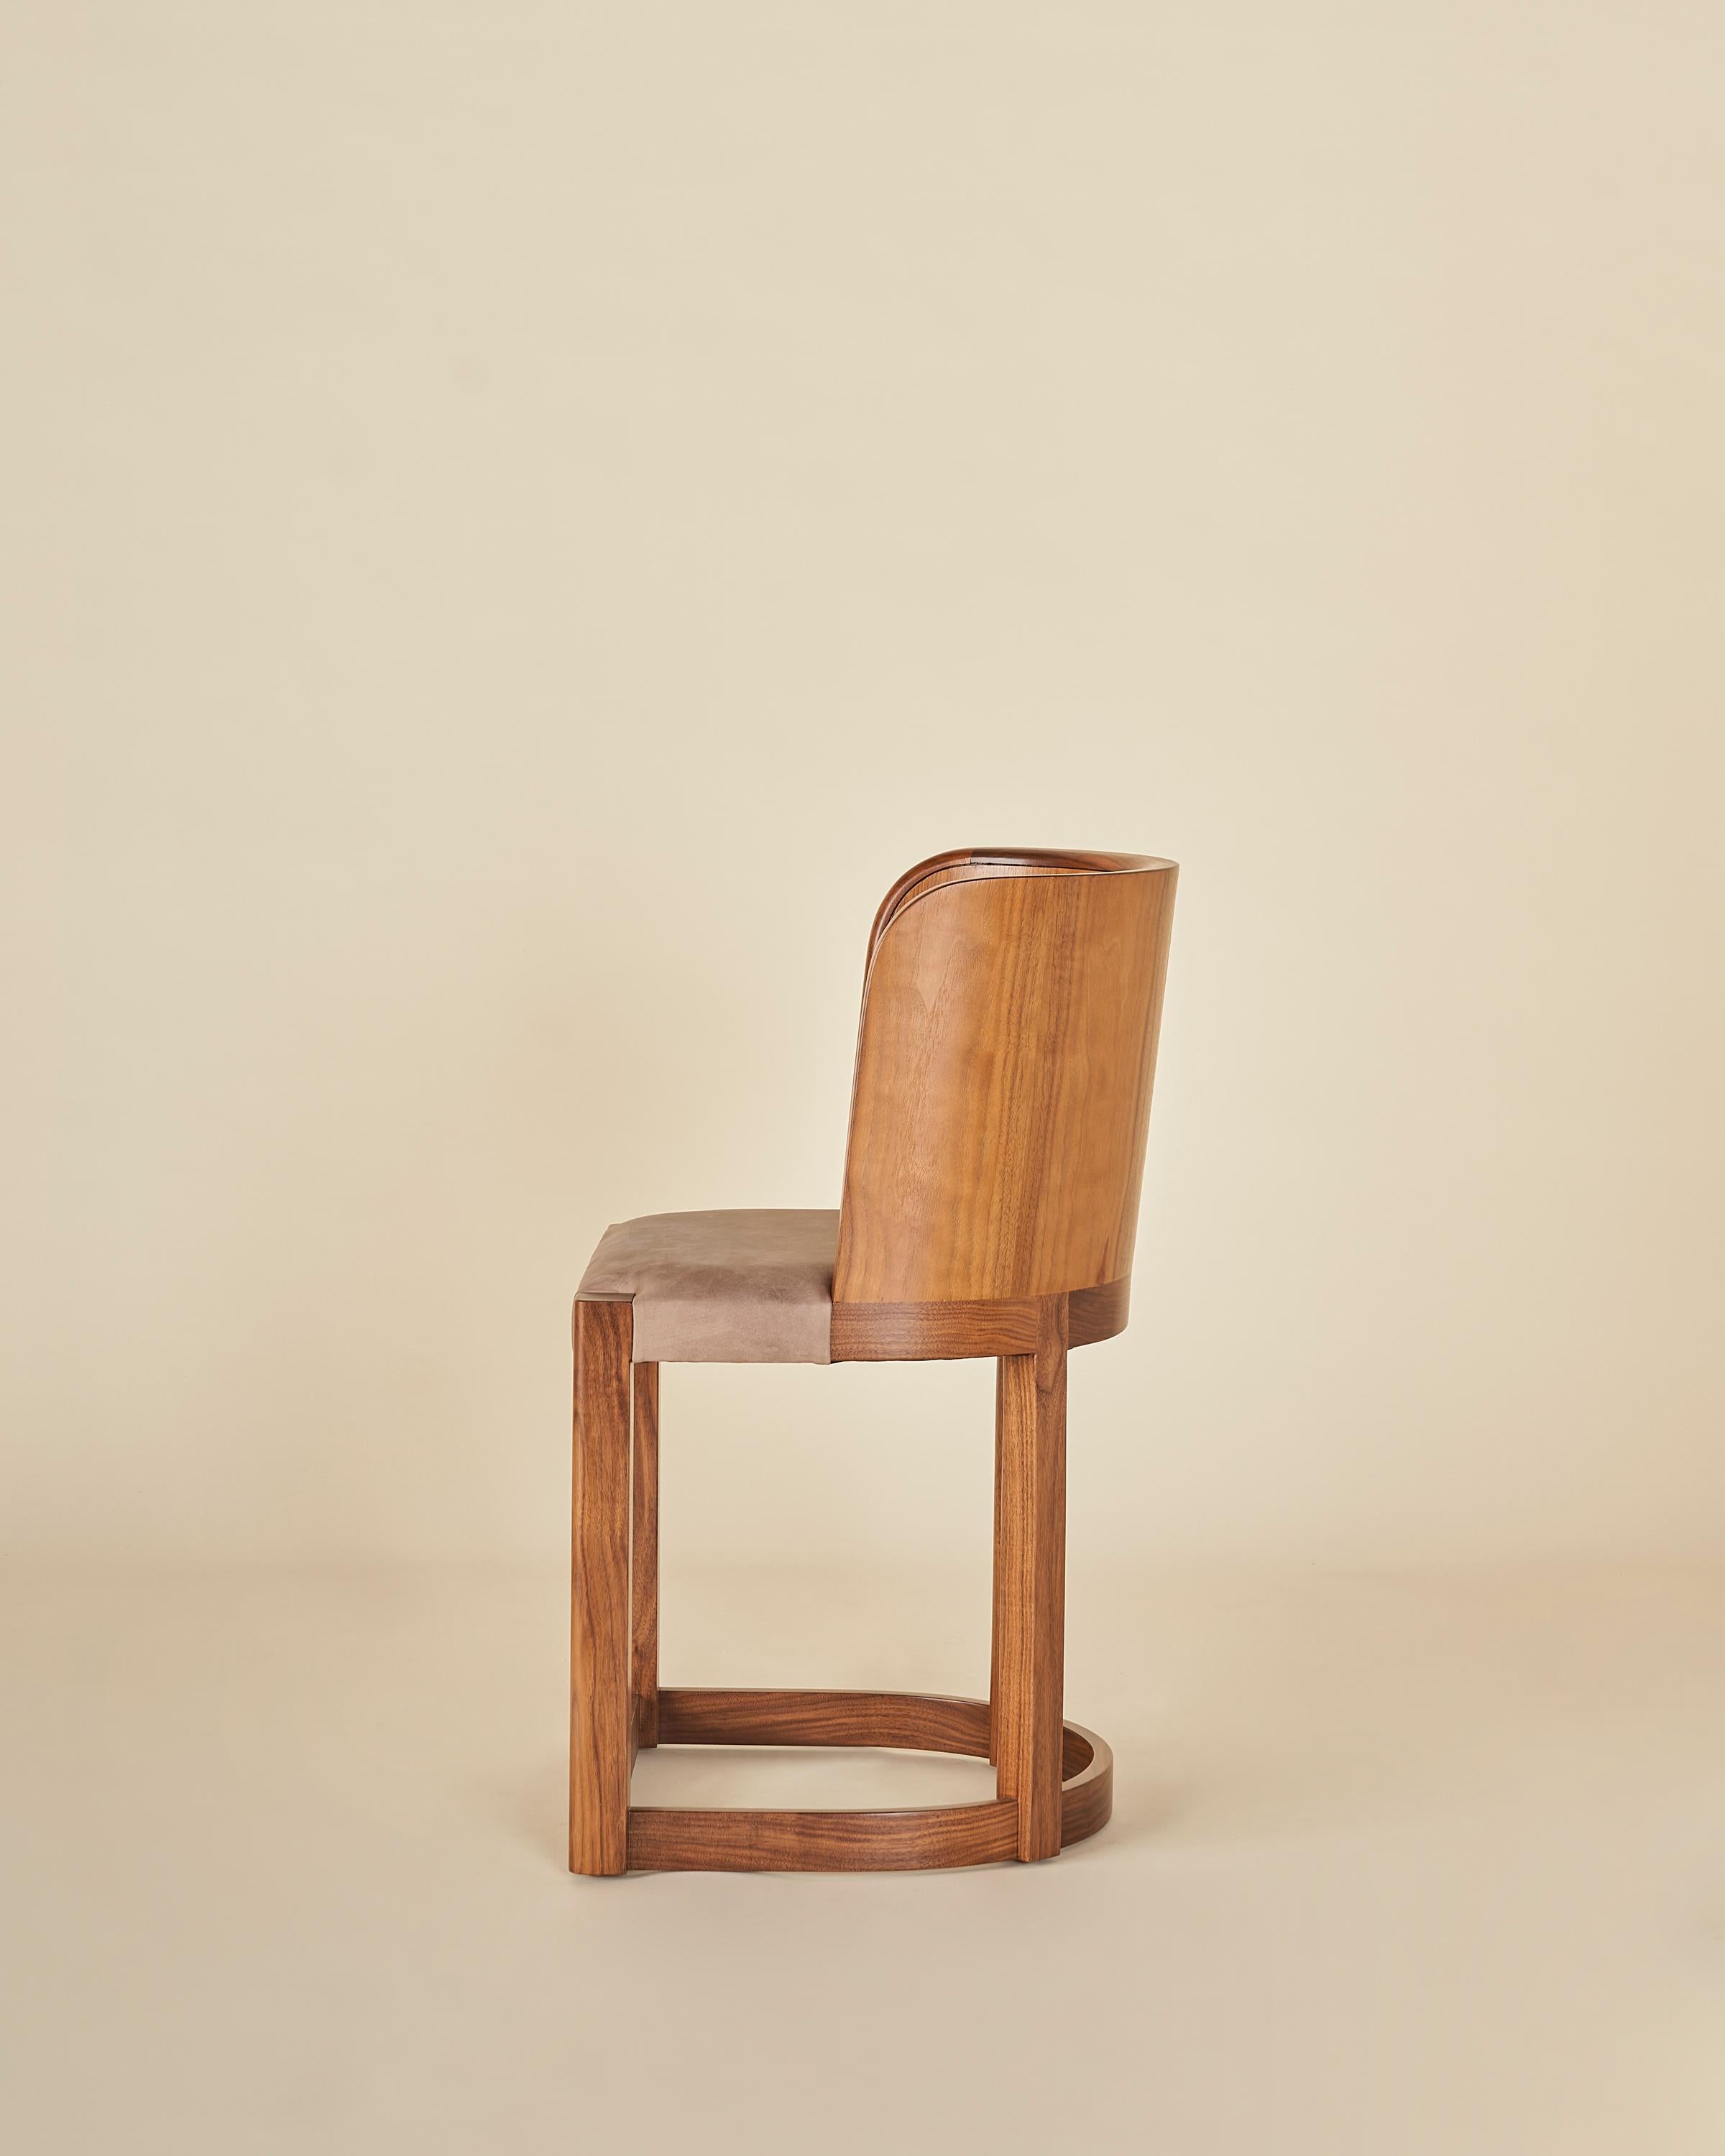 Beautiful walnut dining chair with a molded solid wood back with a tight pecan leather seat.

Our collection pays homage to the everlasting idea of home, a place that is alive as its own character in the story. Taking a reductionist approach to